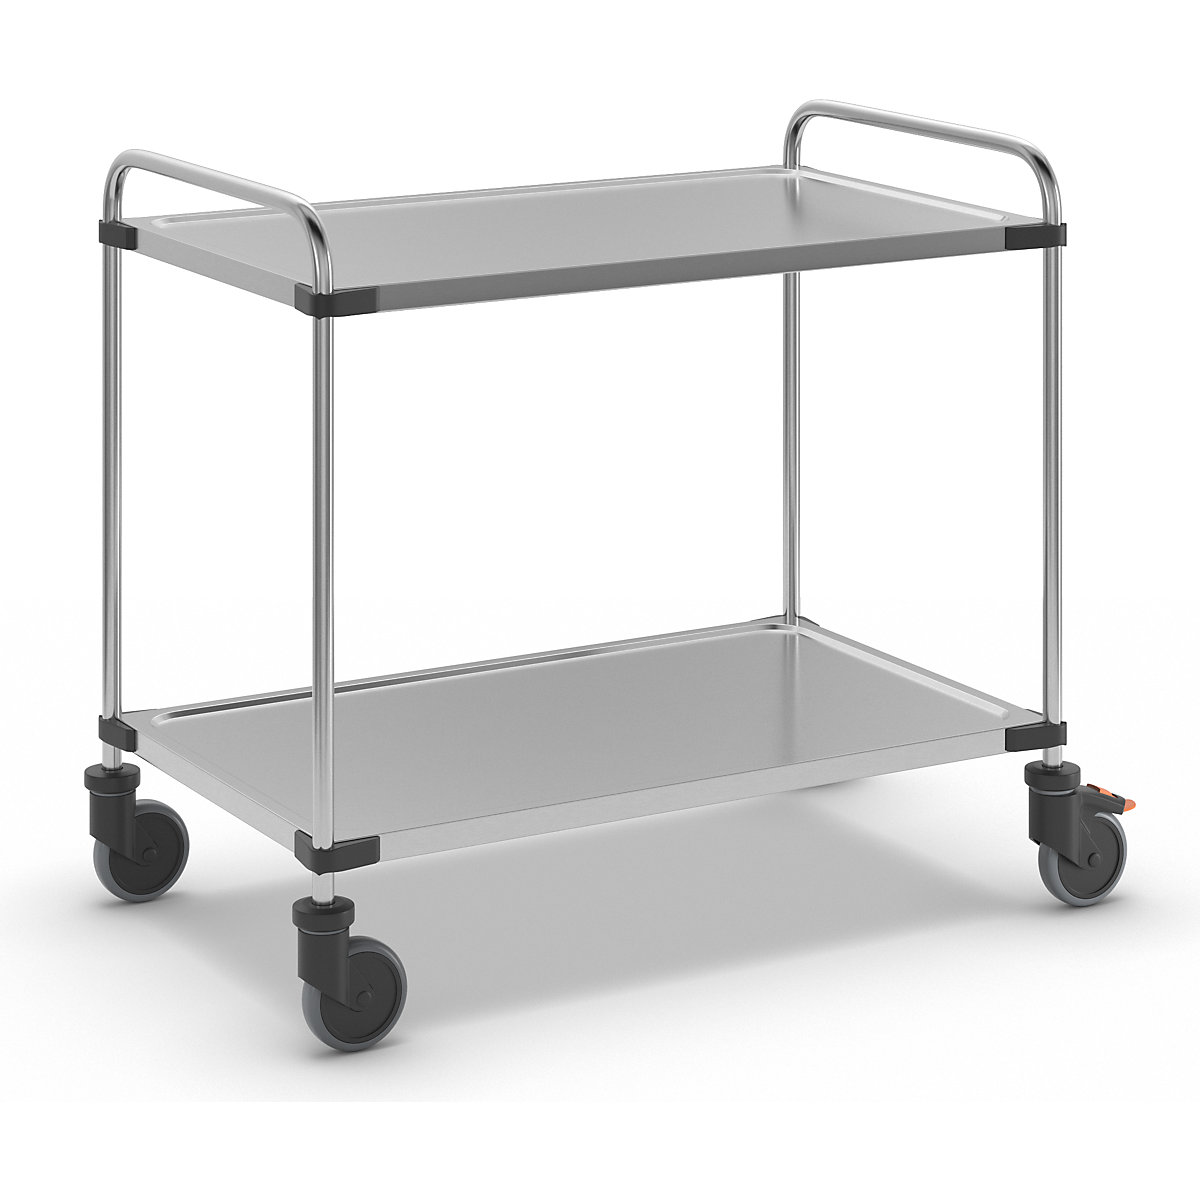 Stainless steel table trolley, with 2 shelves, LxWxH 1070 x 670 x 950 mm, assembled-3